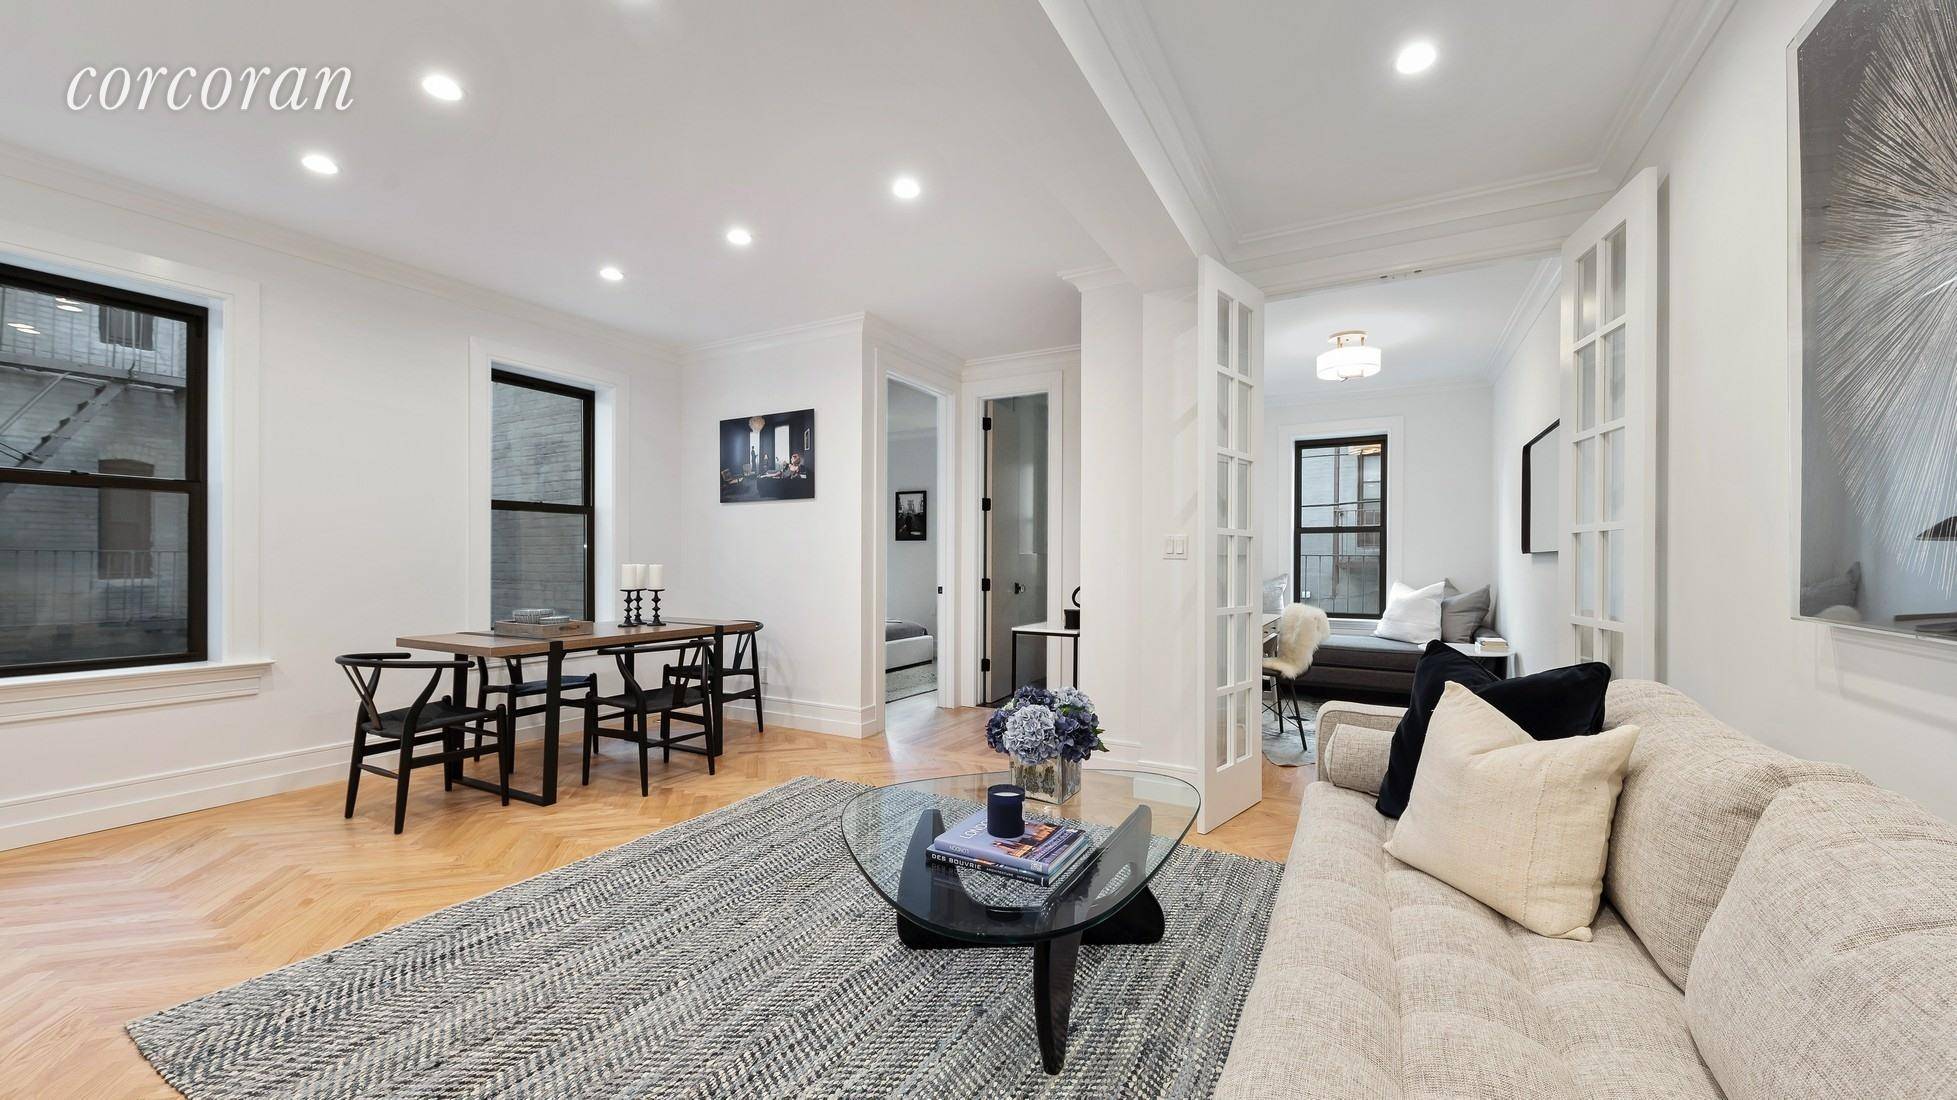 By Private or Virtual Appointment OnlyPresenting Astoria Lights four completely renovated pre war co op buildings that have been reimagined and reinvigorated with open, loft style floor plans, cutting edge ...